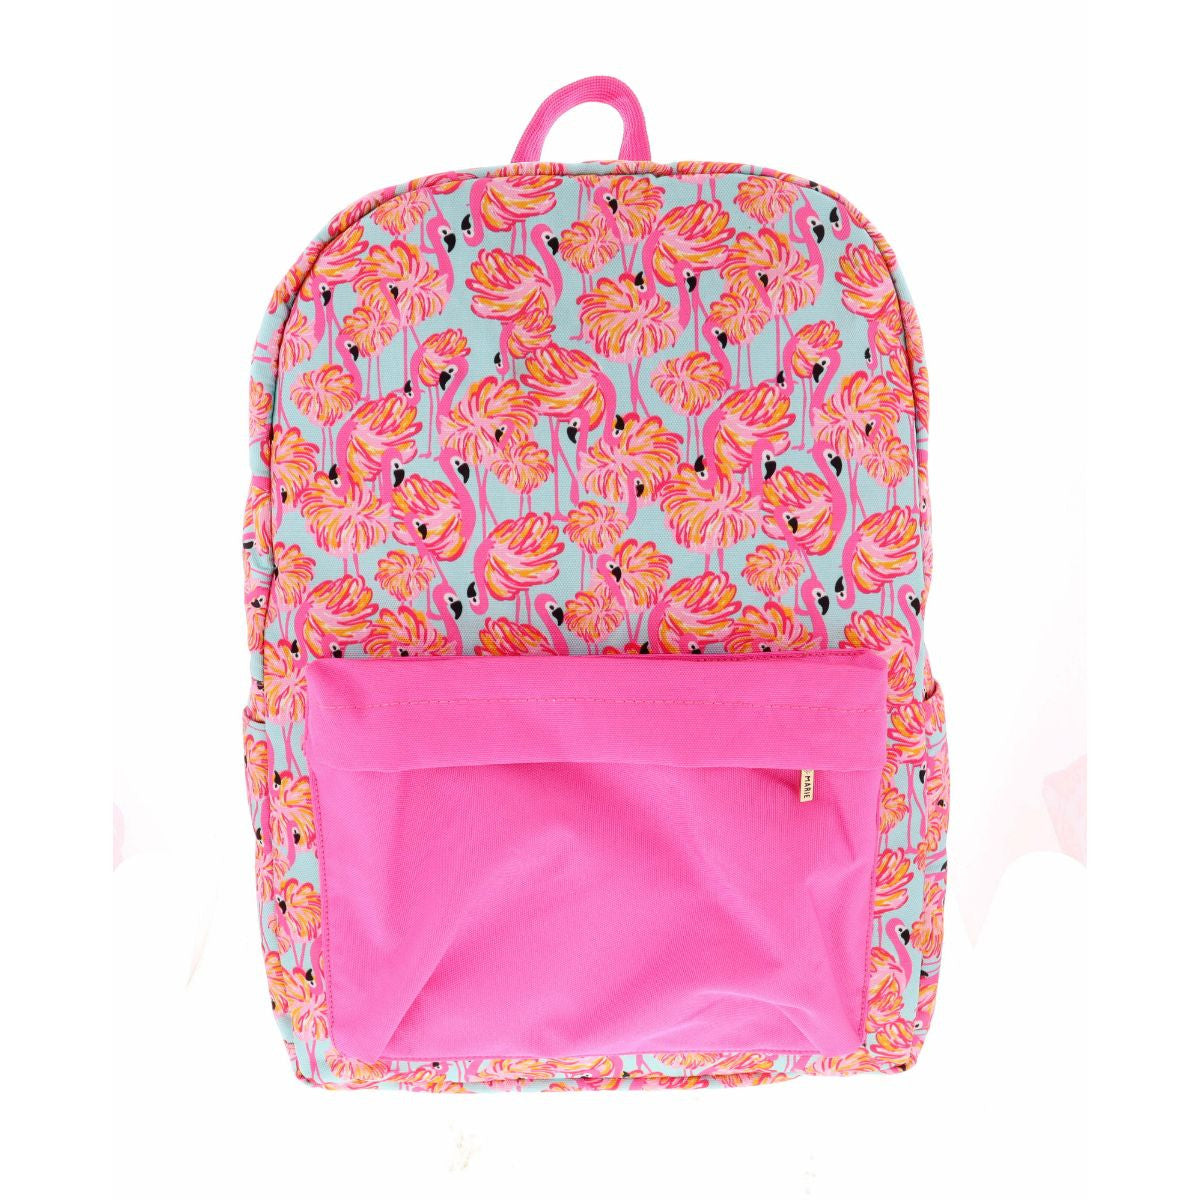 SHAKE YOUR FEATHERS BACKPACK-Body and Sol